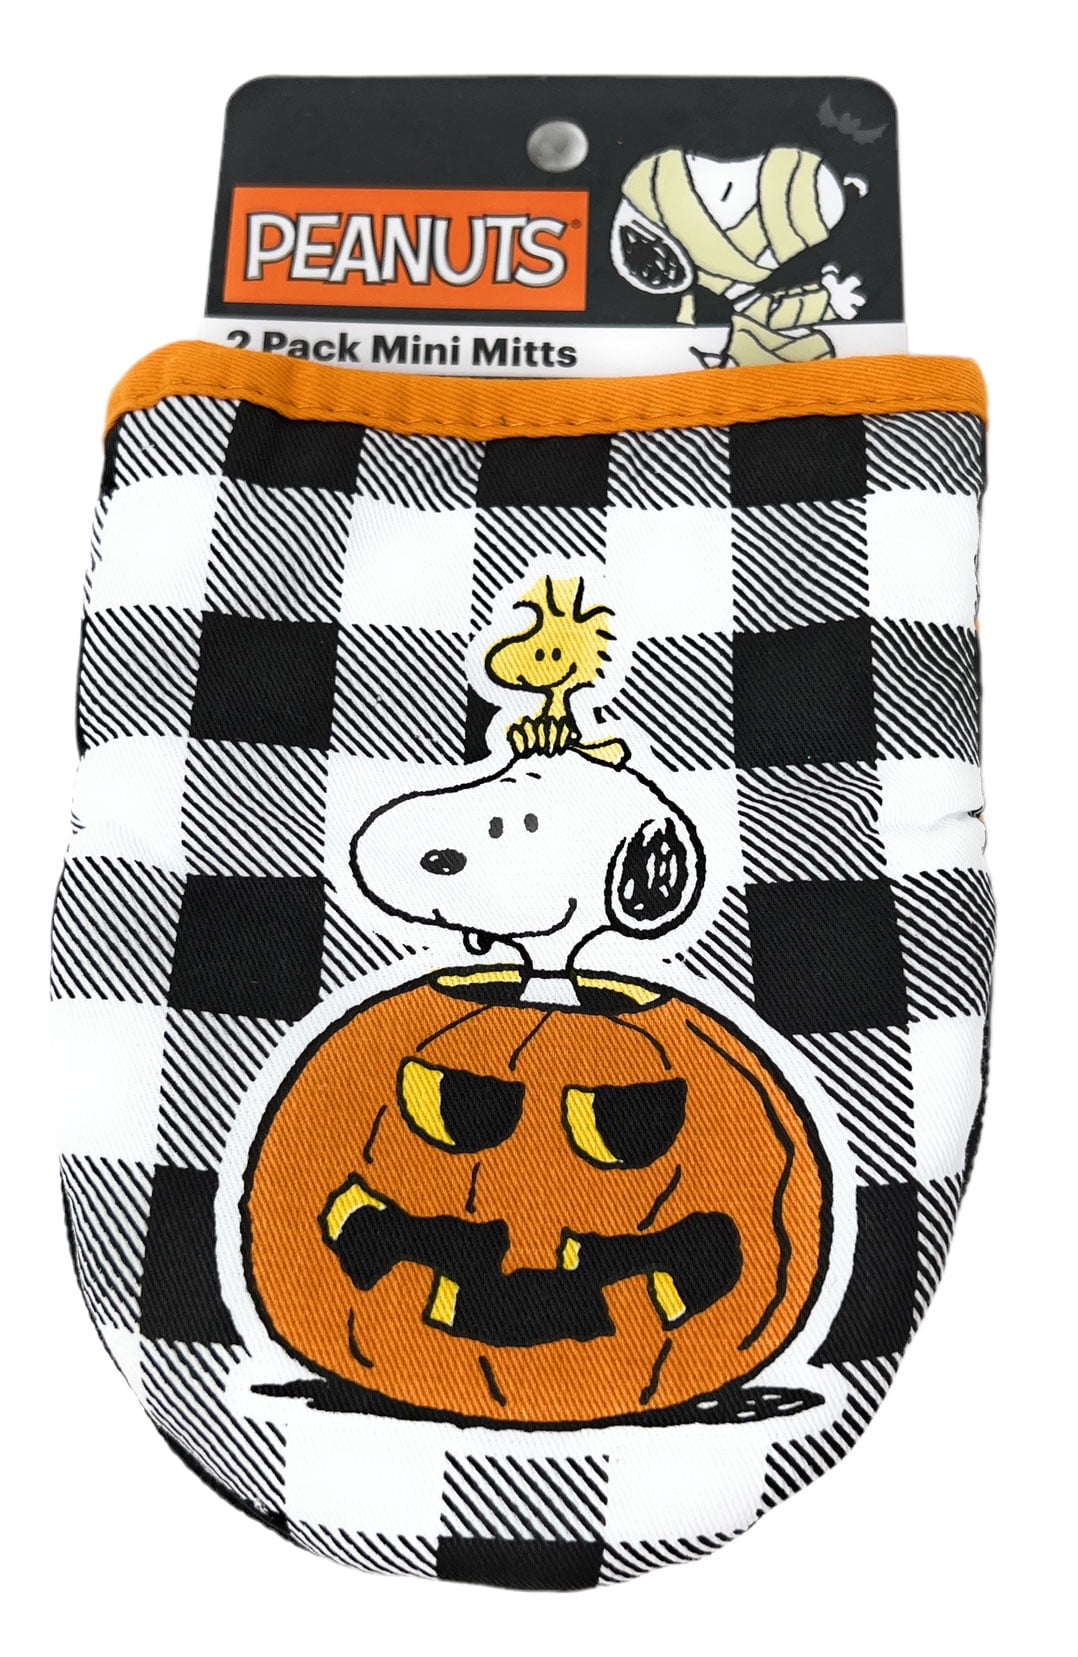 New Snoopy Halloween Scary Official Peanuts Oversized Oven Mitt